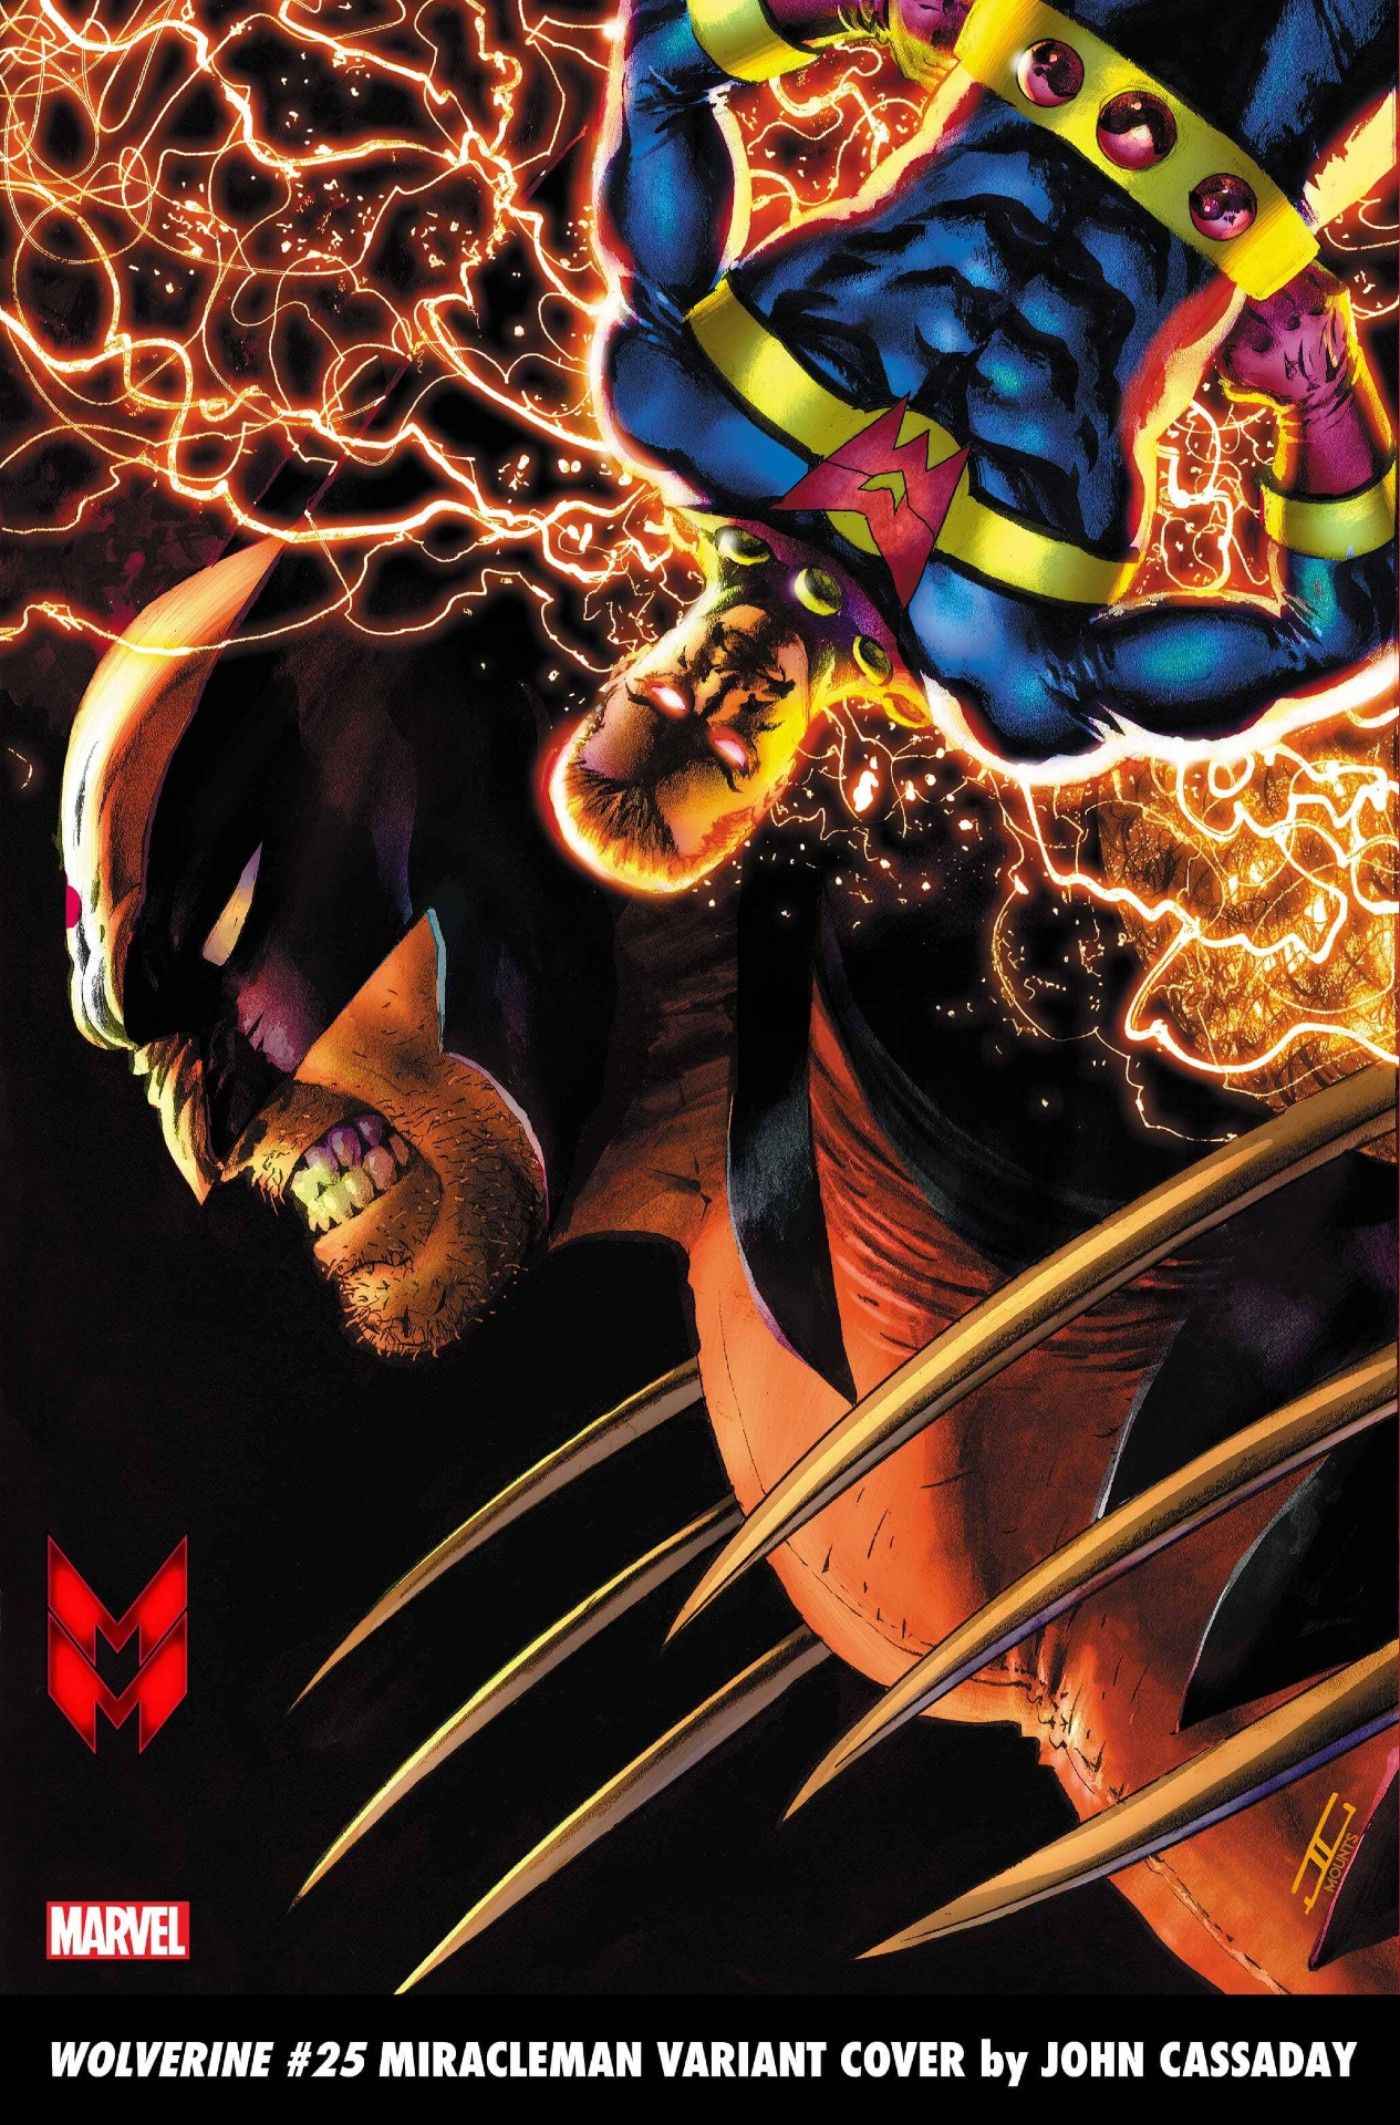 WOLVERINE 25 MIRACLEMAN VARIANT COVER by JOHN CASSADAY